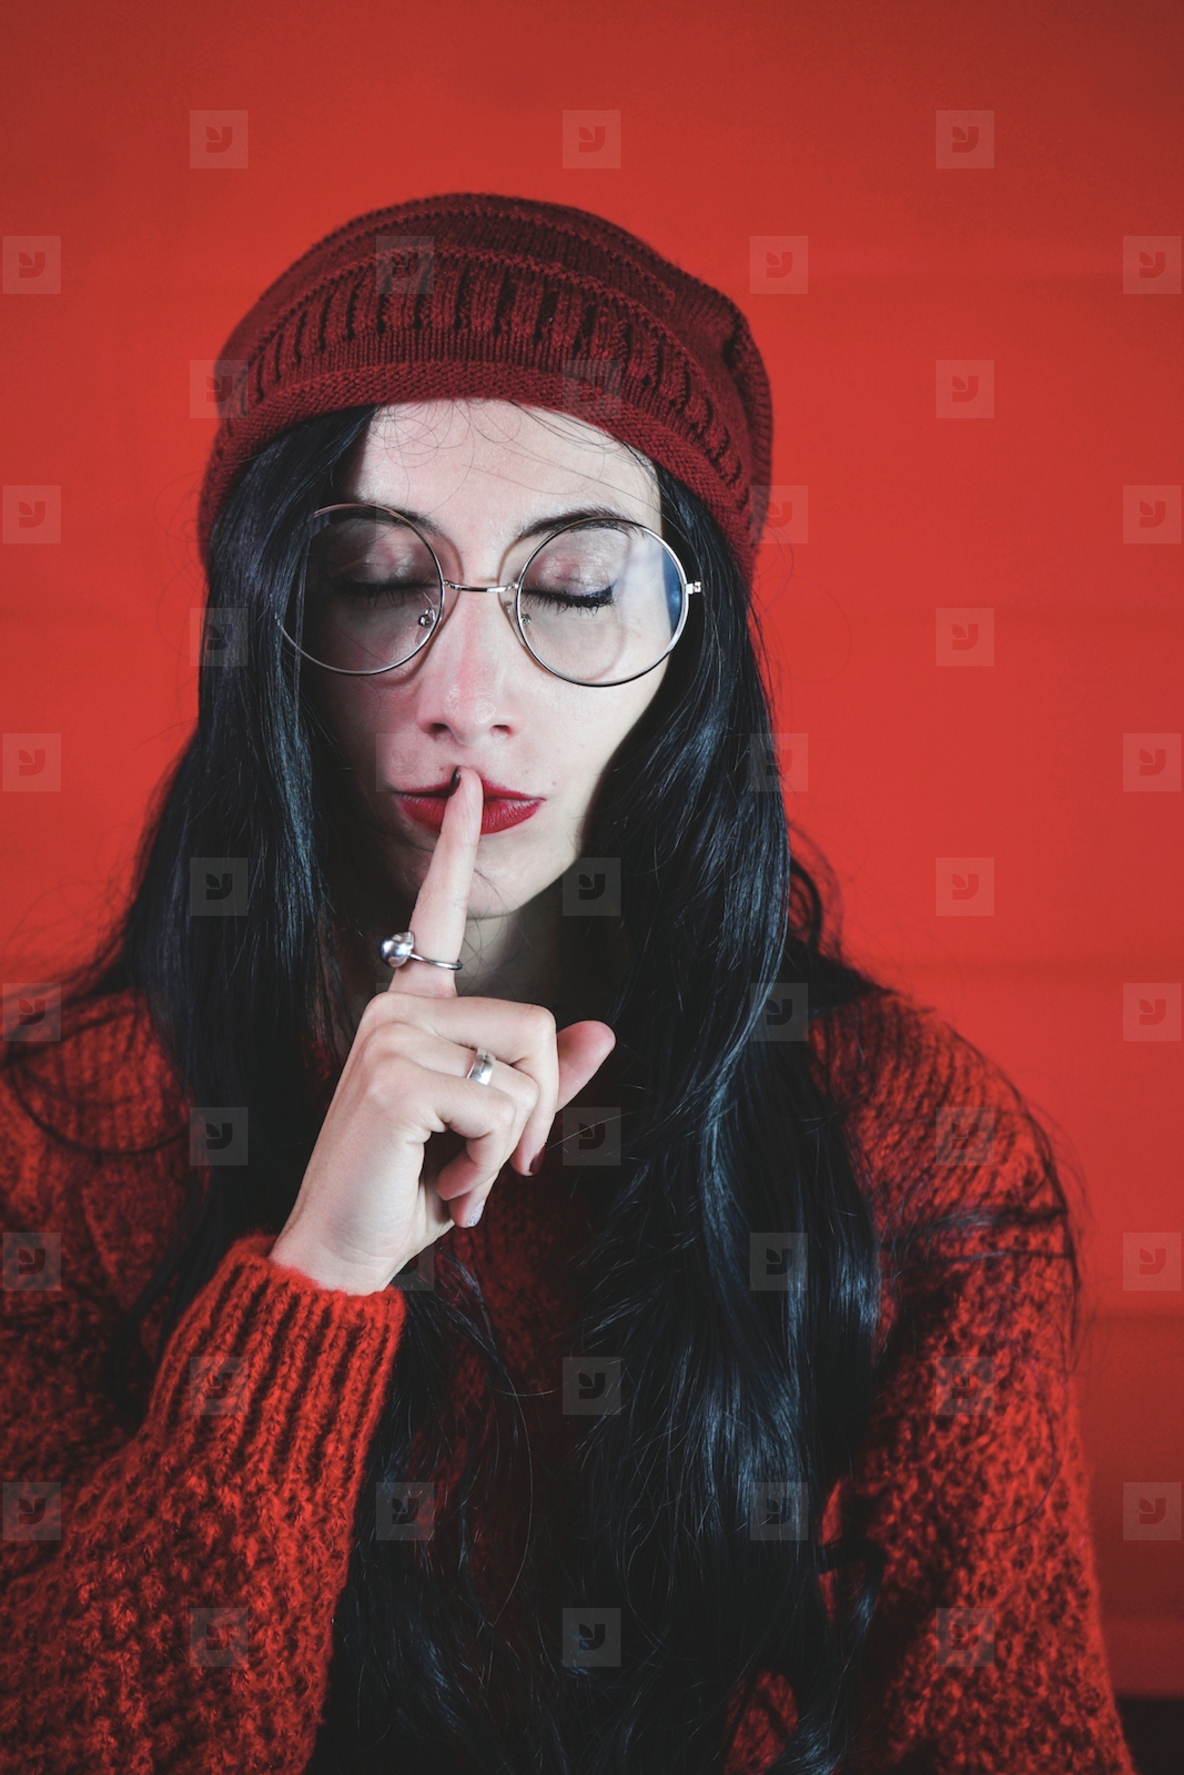 Young woman asking for silence against a red background